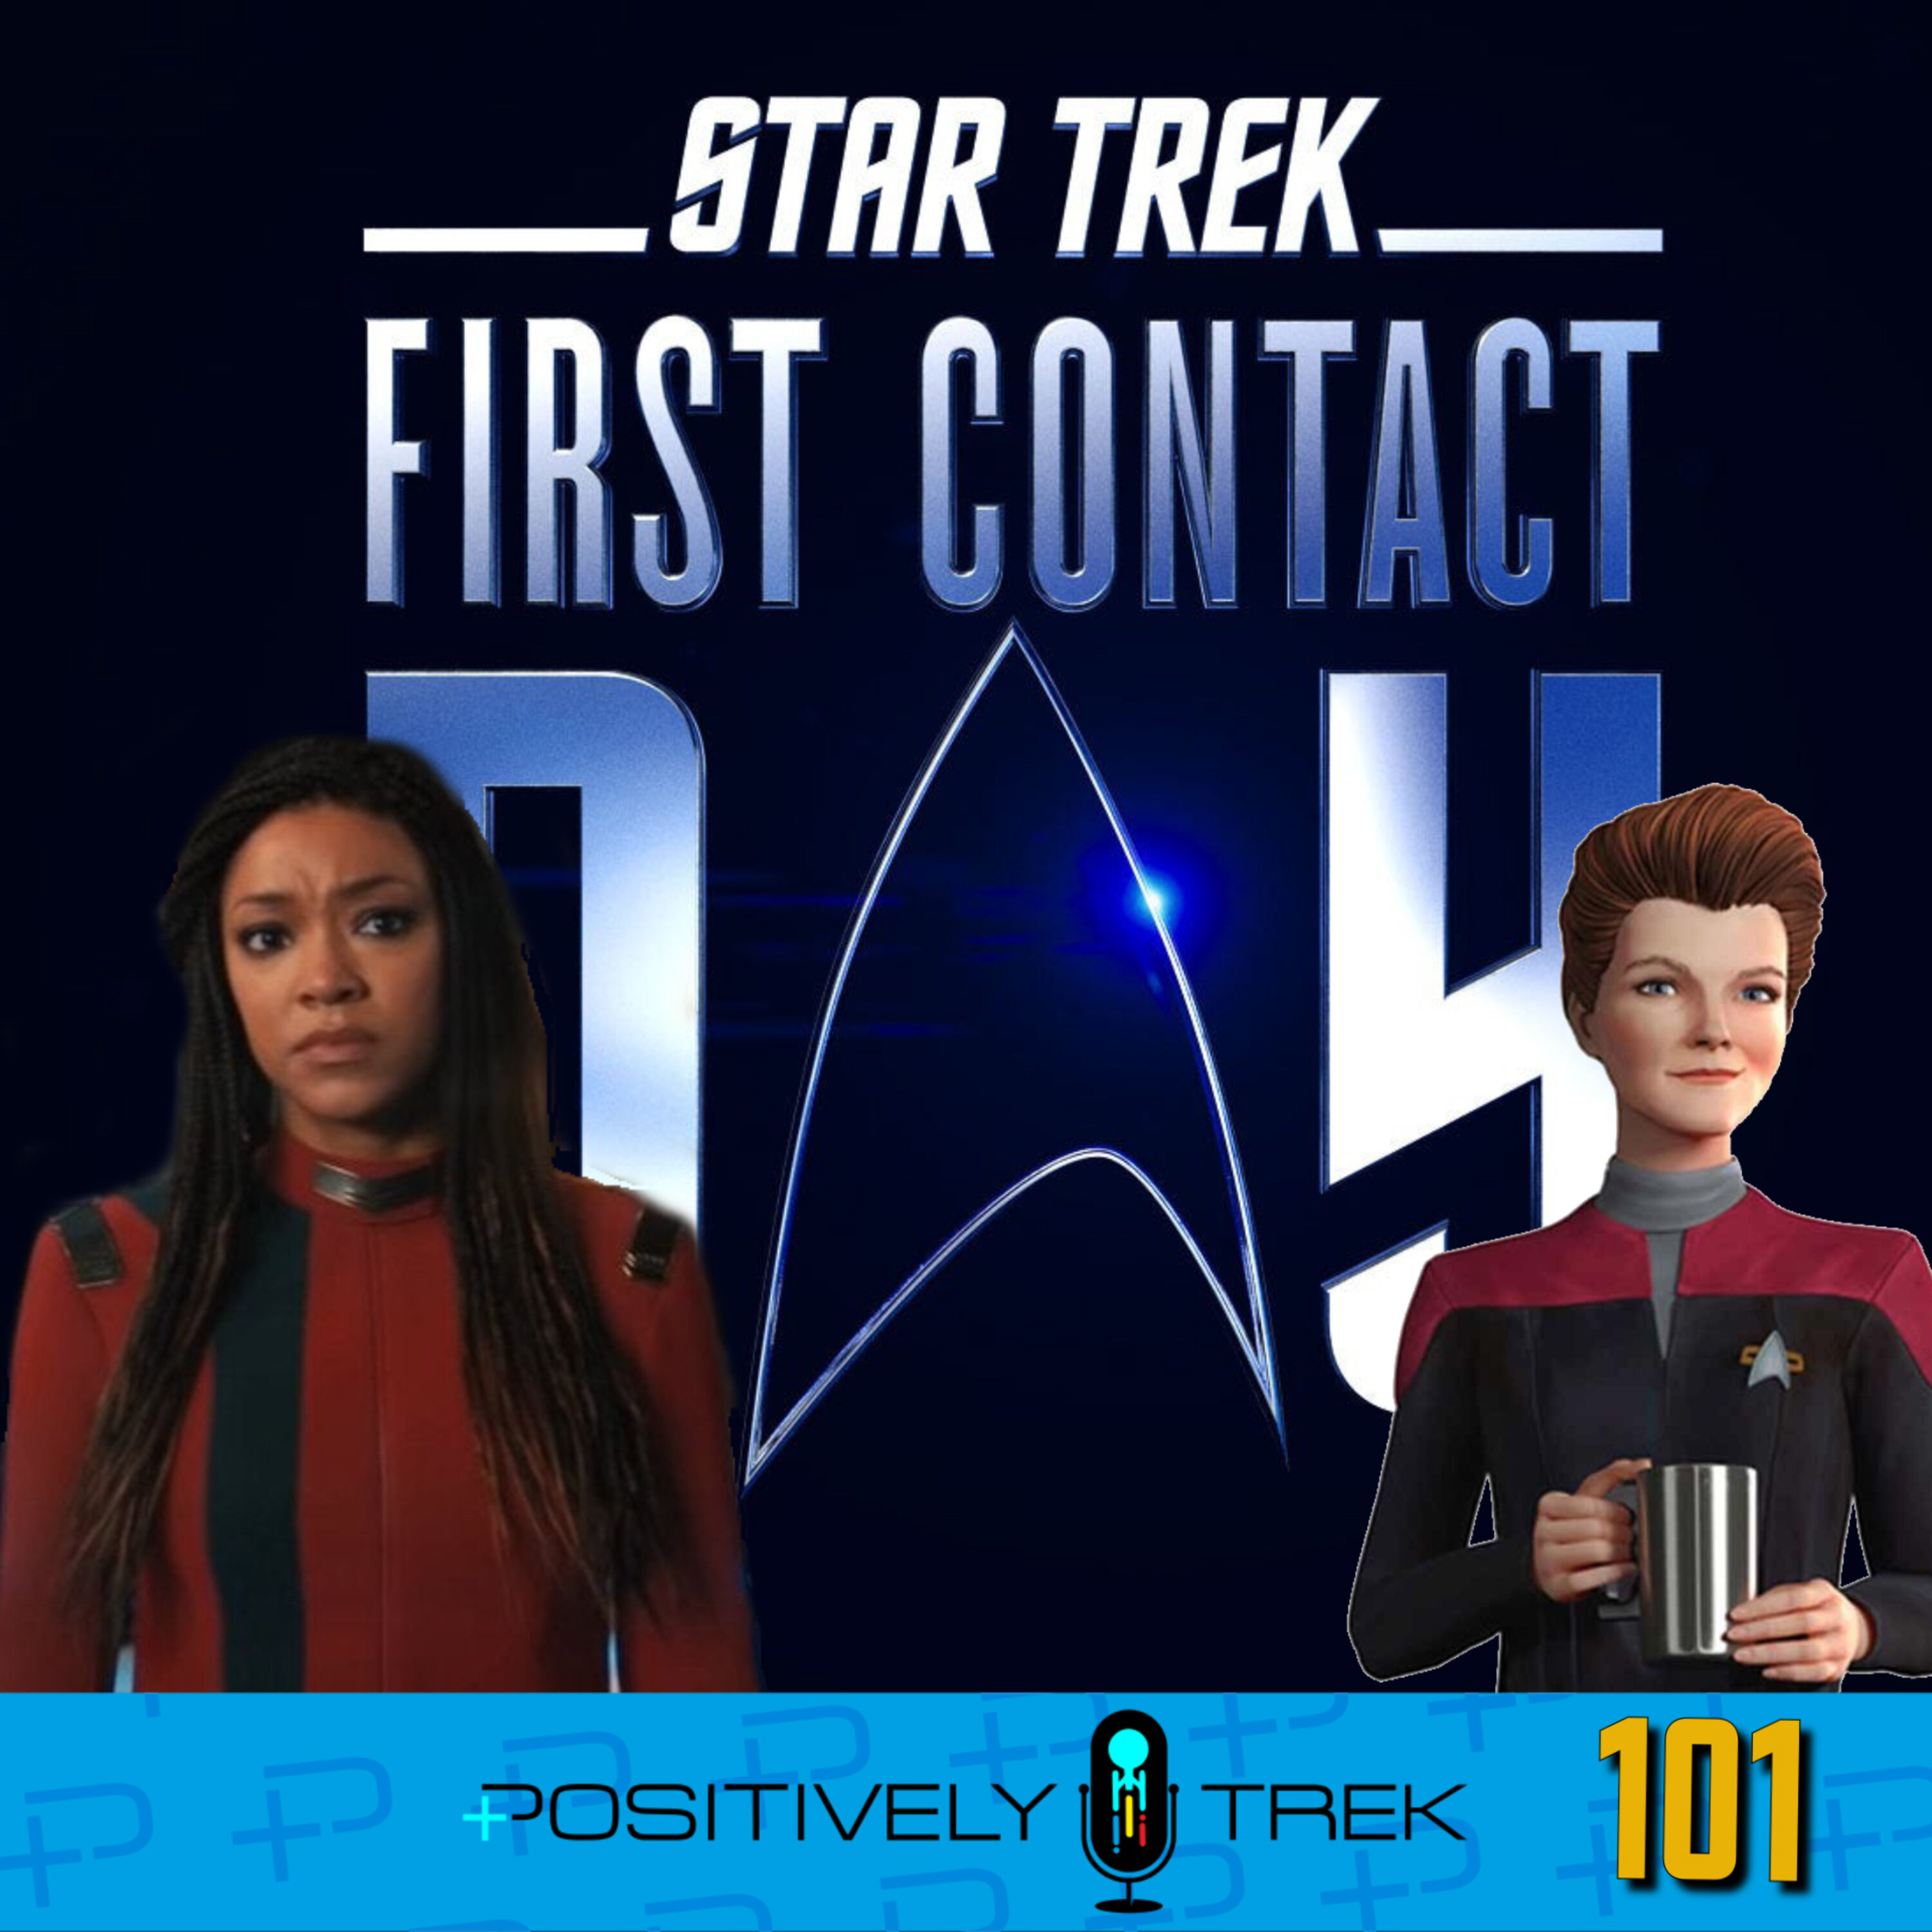 An Overload of Trek News on First Contact Day!